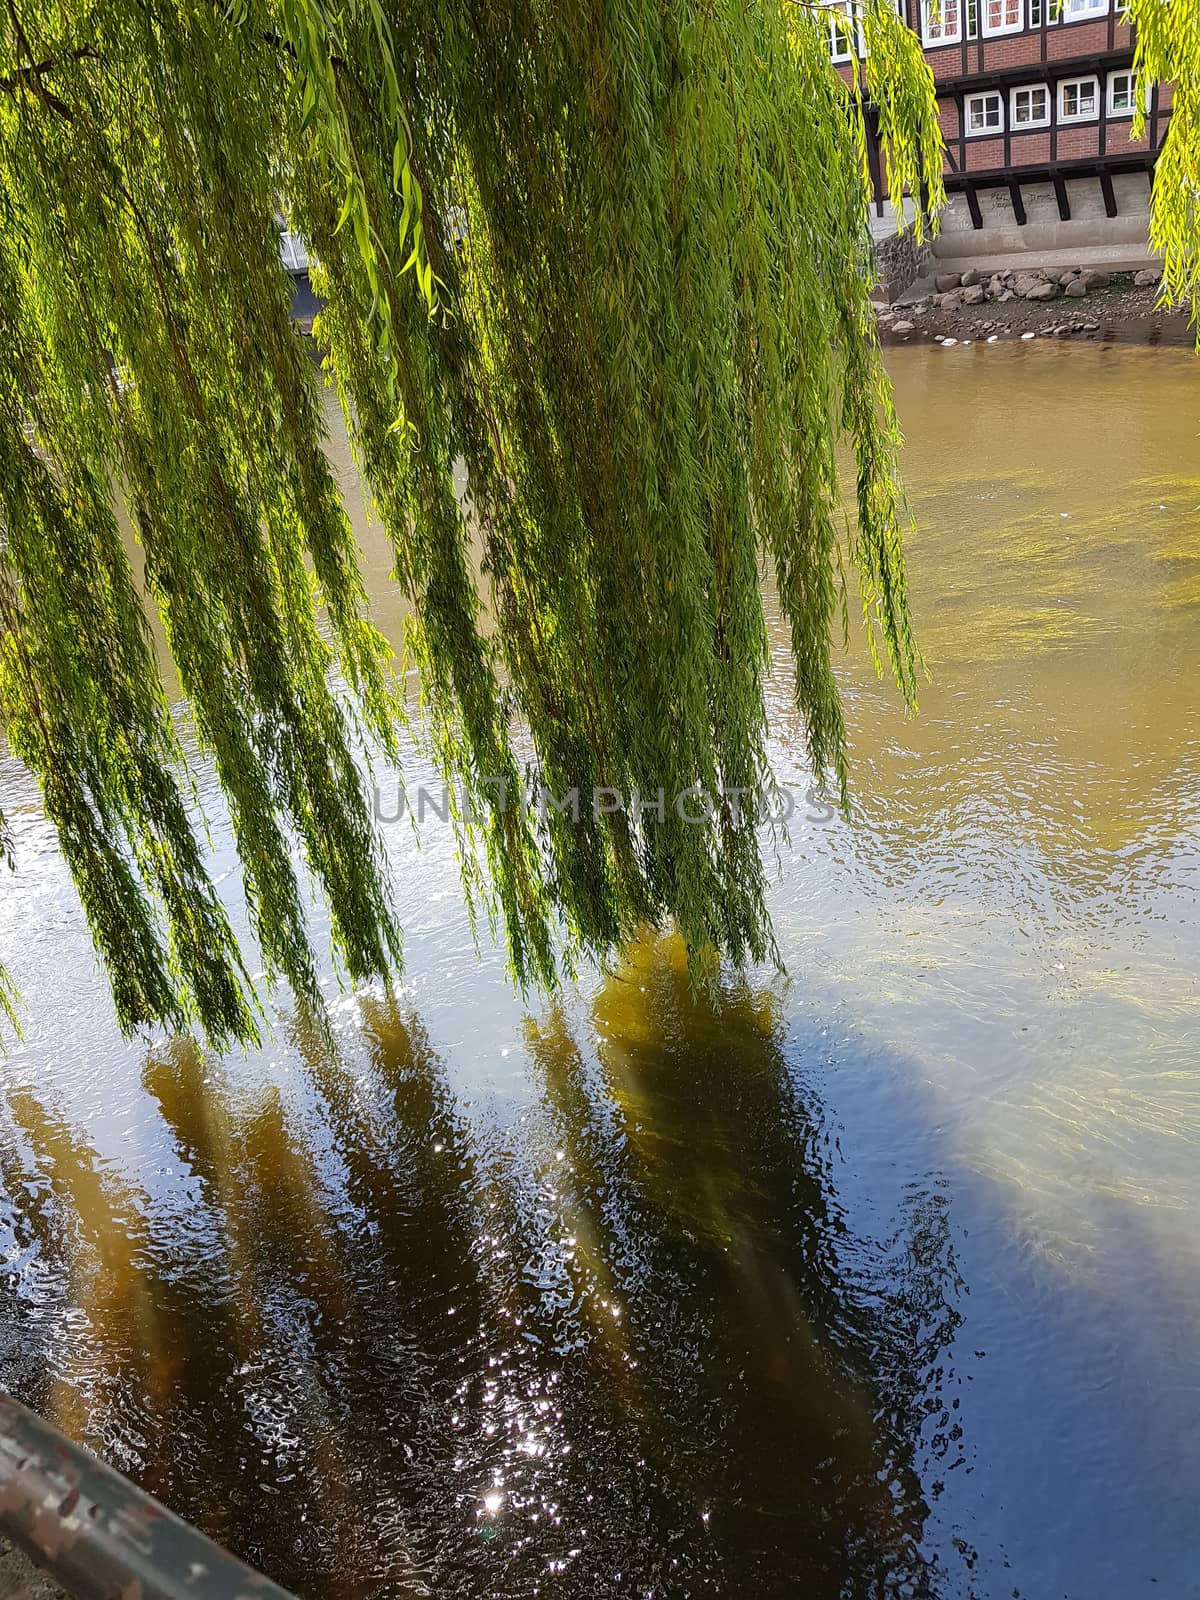 Light green weeping willow that lets its branches hang over the river Ilmenau Ilmenau.